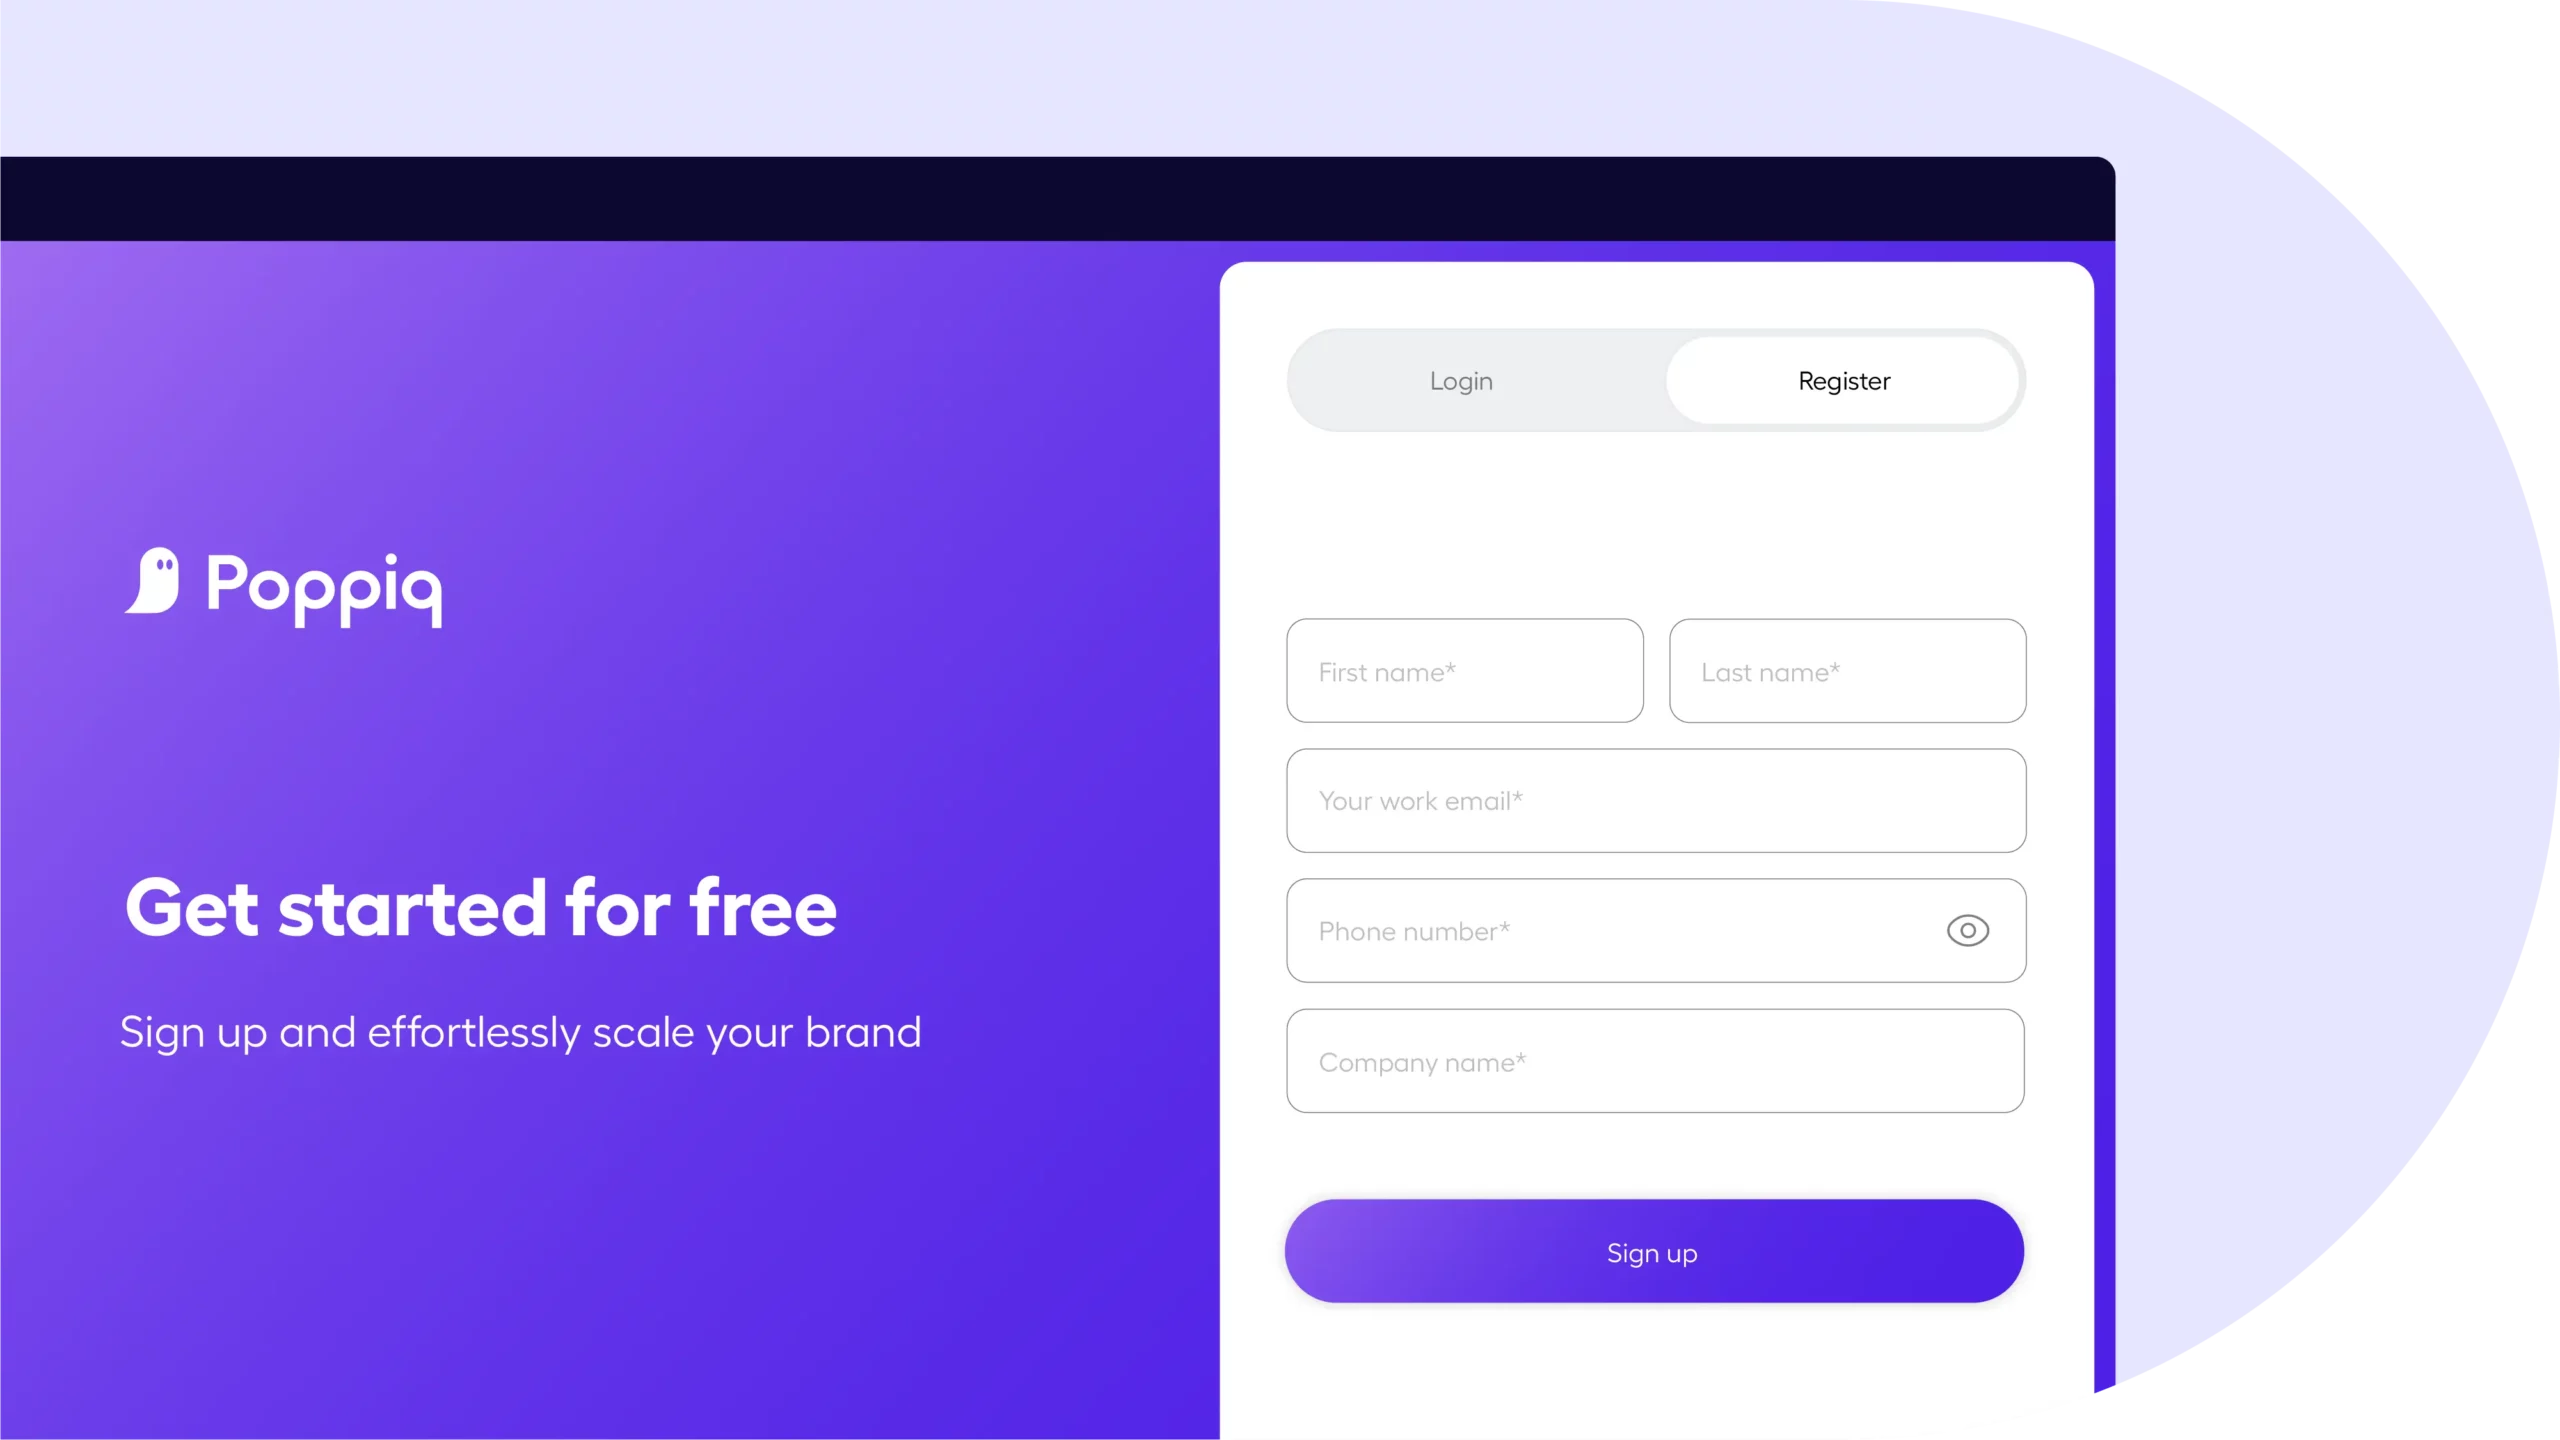 Sign in to the Poppiq Platform